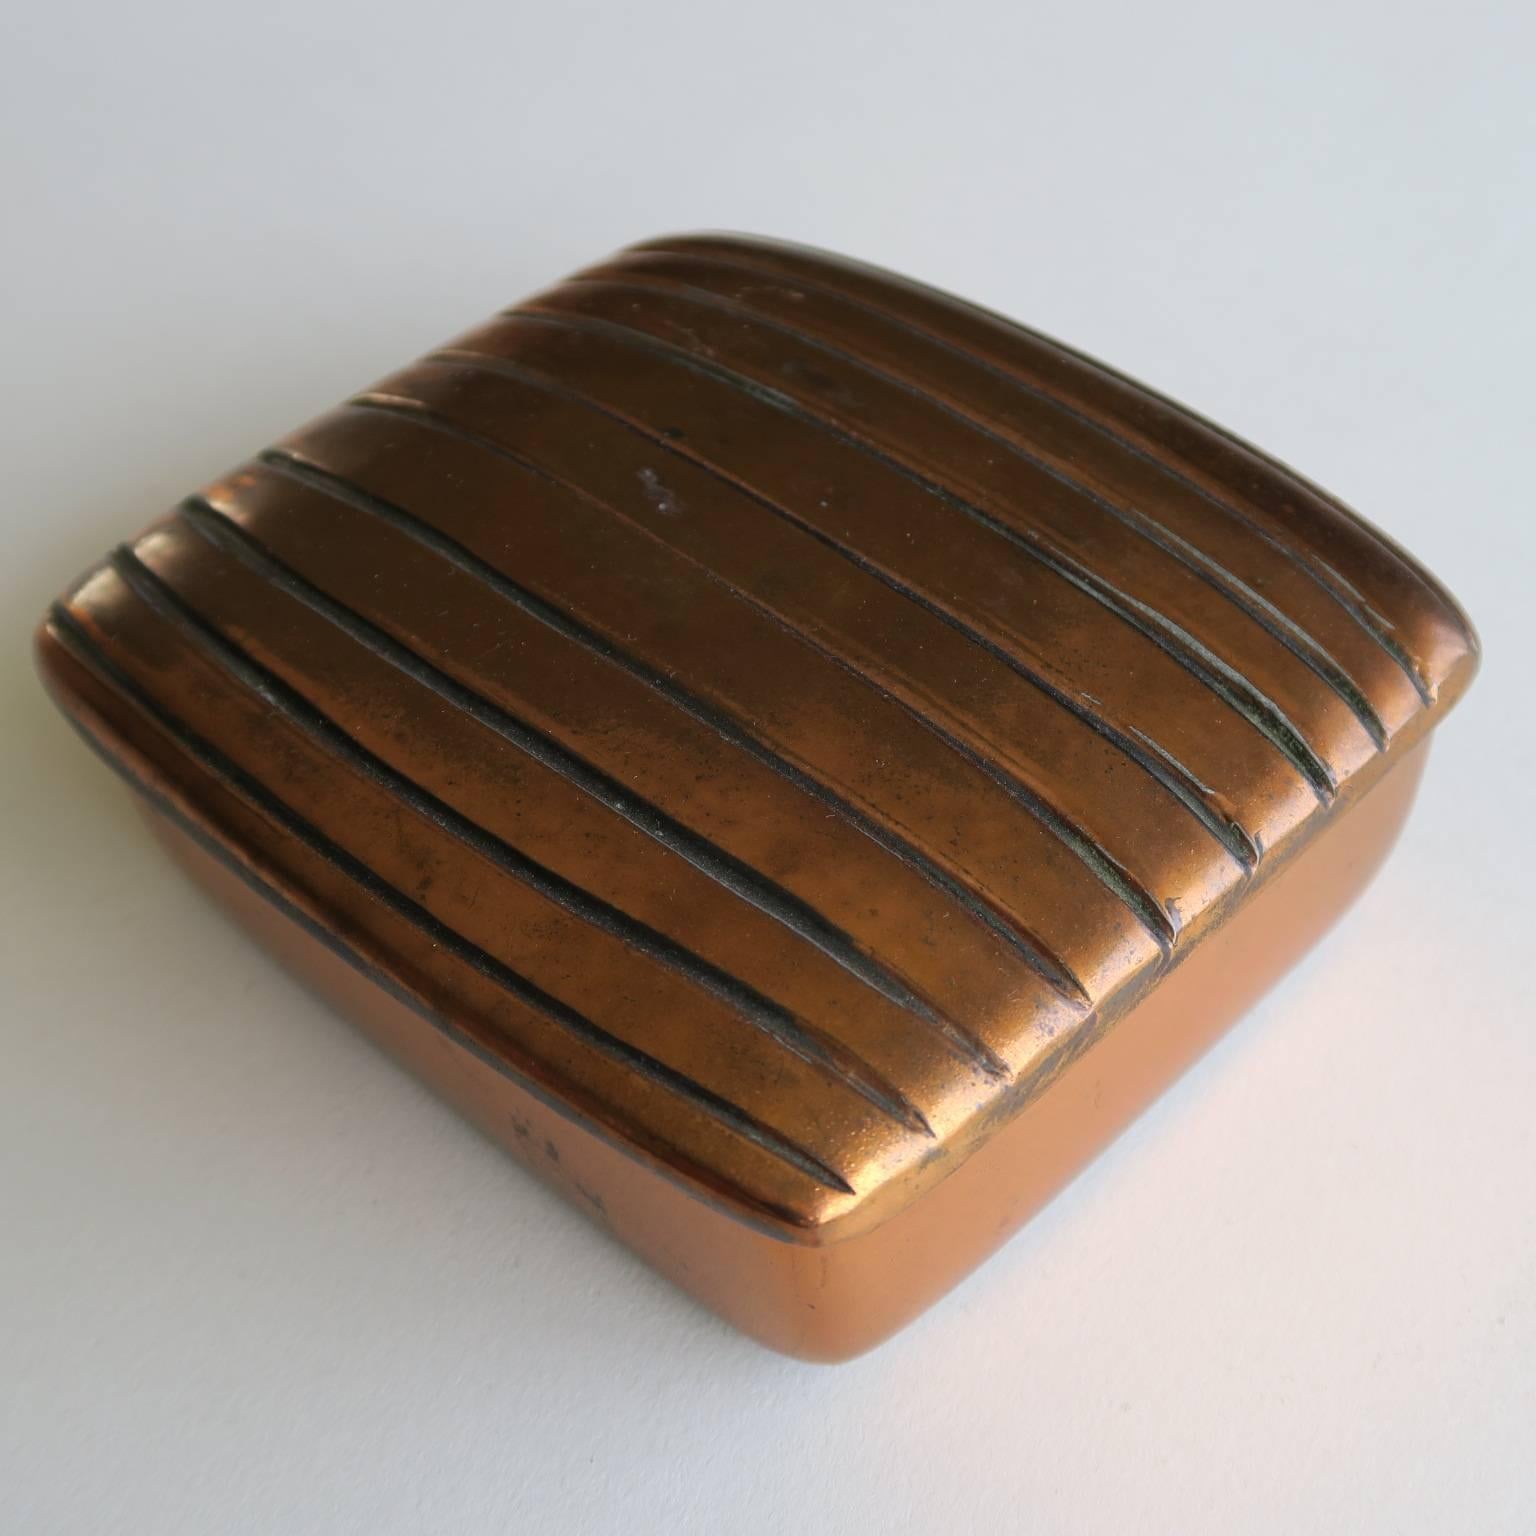 Ben seibel box, copper-plated cast metal, cork lined interior, felted bottom, 1950s. Measures: 2 high x 4 1/2 x 4 inches.